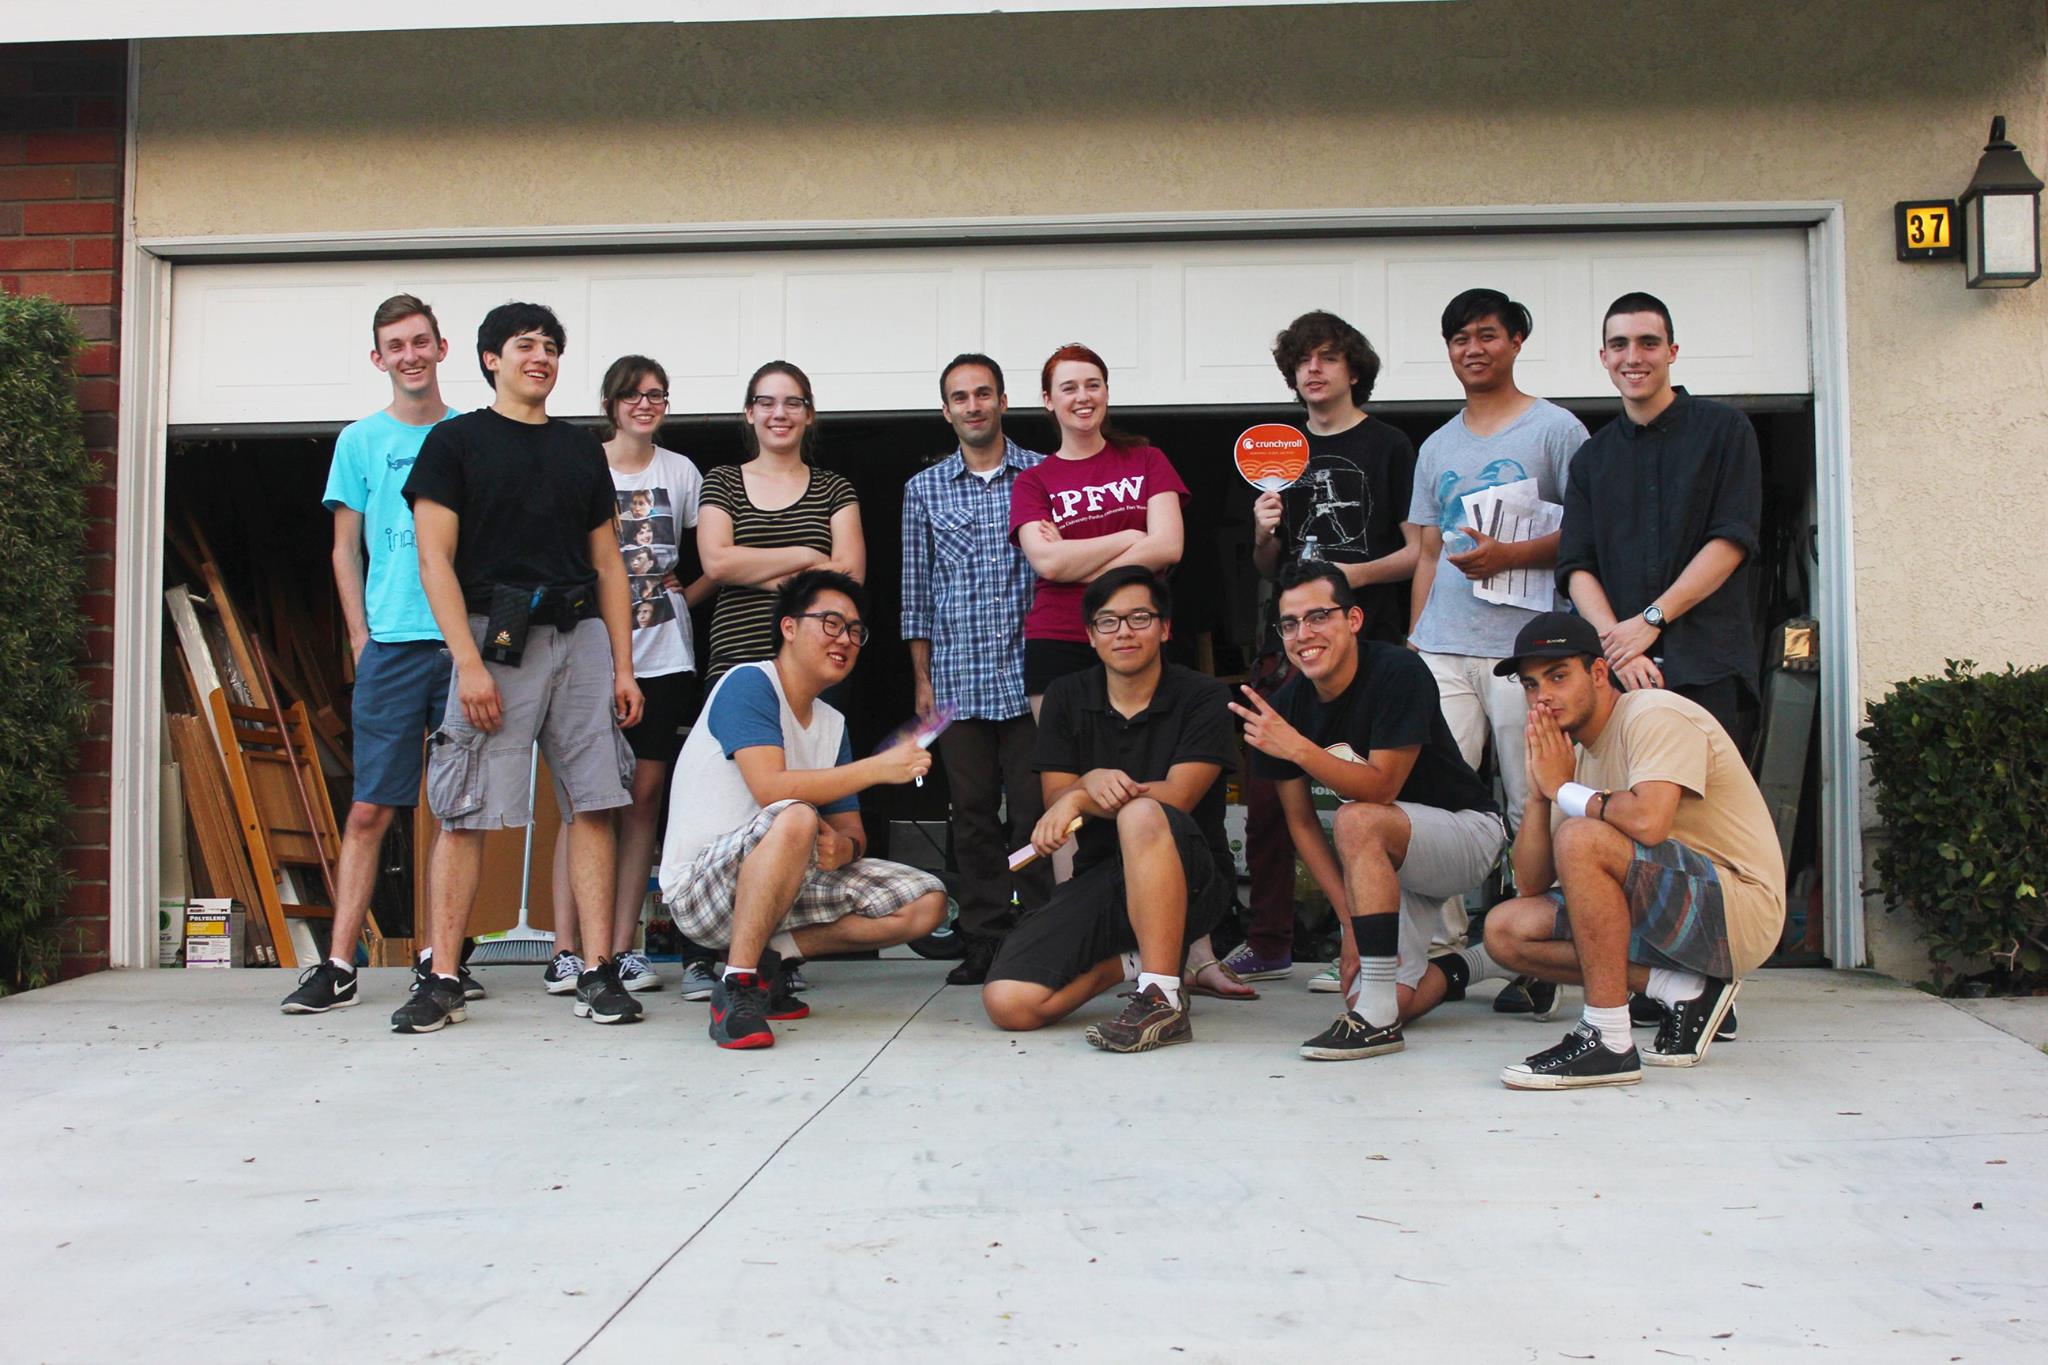 The Cast and Crew for the Saddleback Student Film 